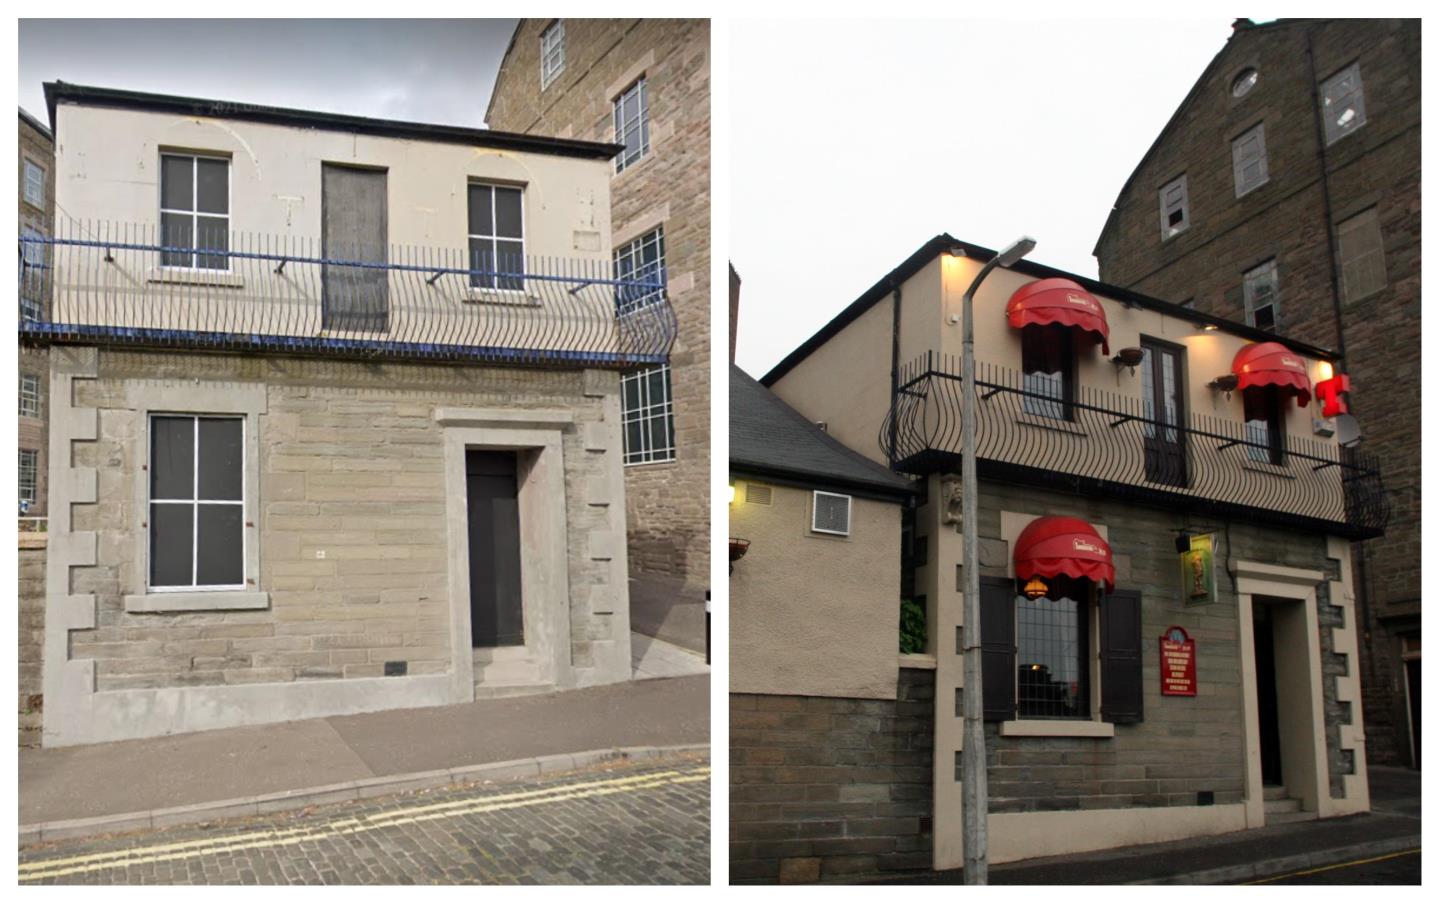 The original Smugglers bar, right, is now deemed a threat to public safety. Left is the building now.